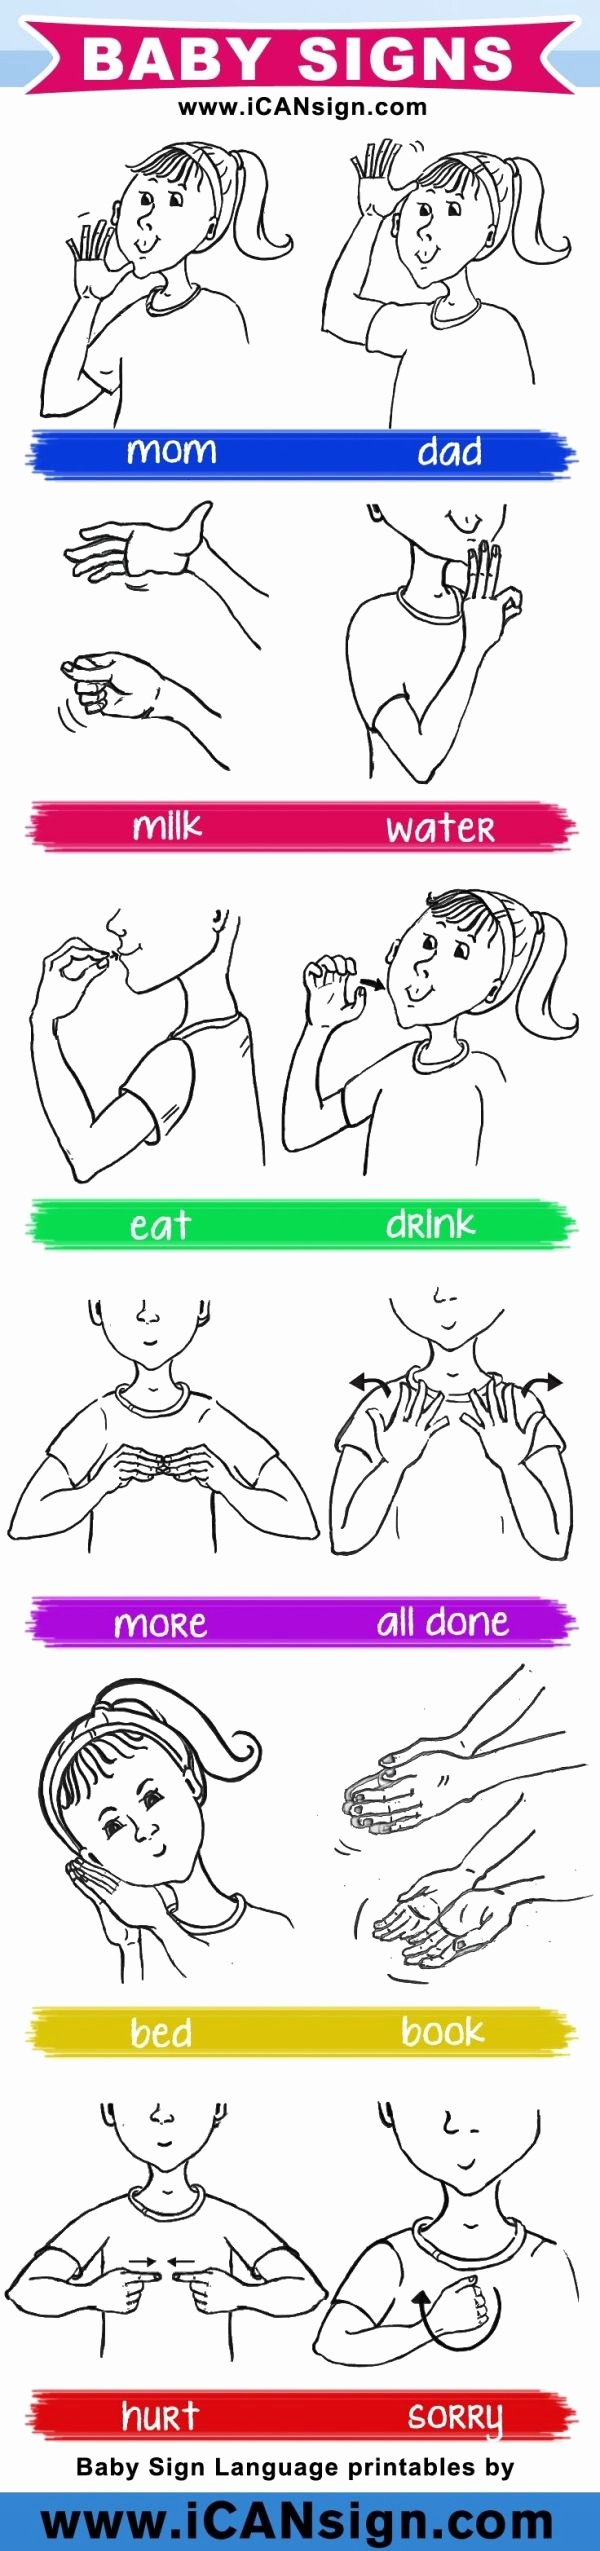 Infant Sign Language Chart Awesome Baby Sign Language Chart by Patricé